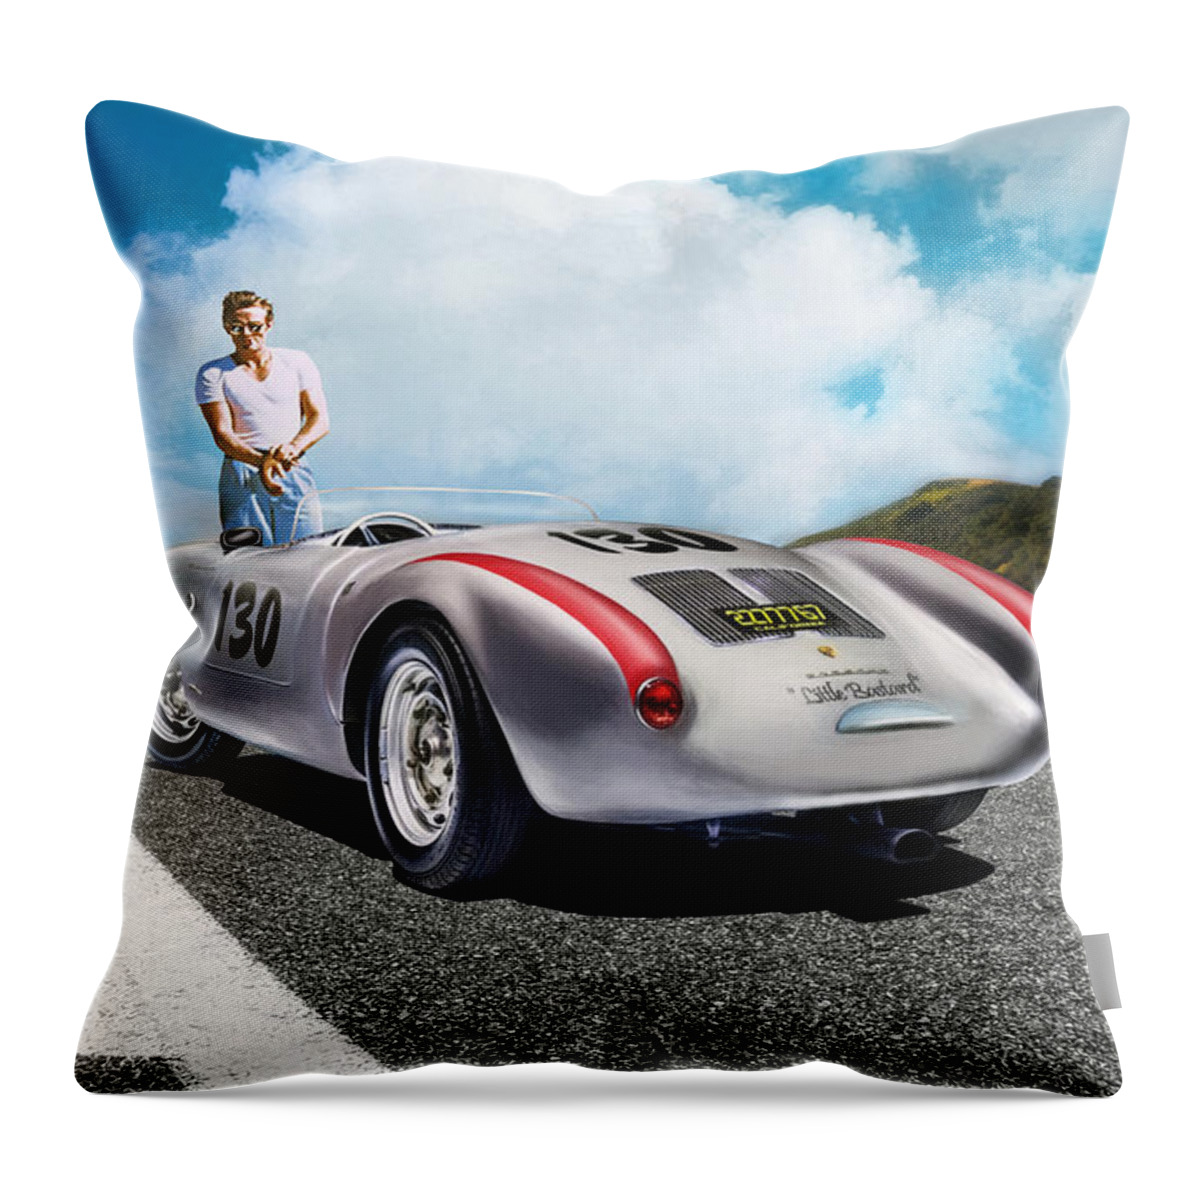 James Dean Throw Pillow featuring the digital art Road To Eternity by Peter Chilelli